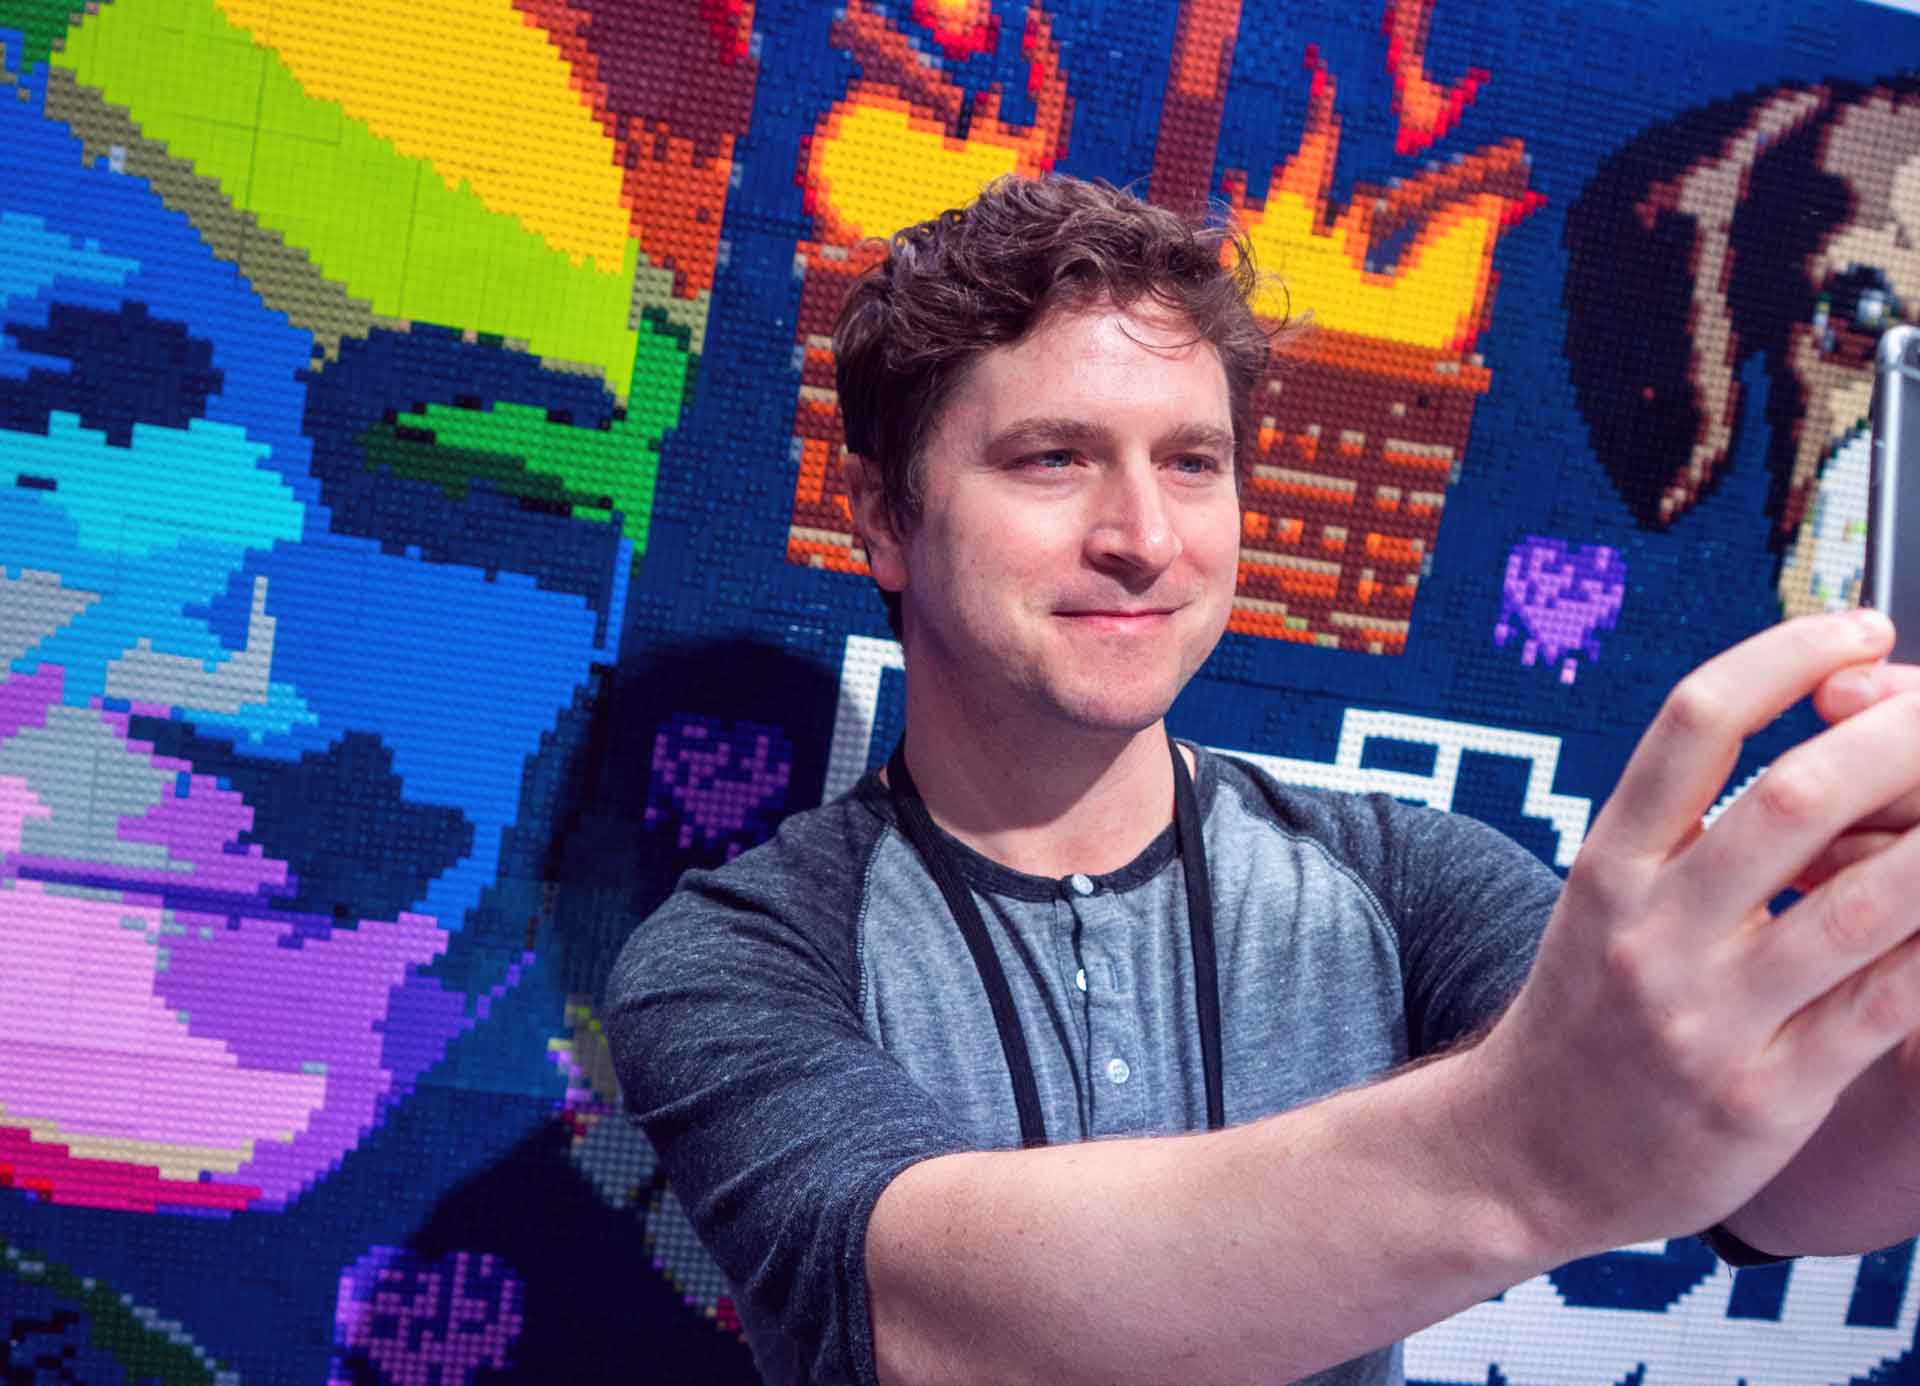 The real life Kappa poses in front of a mural of his popular emote.